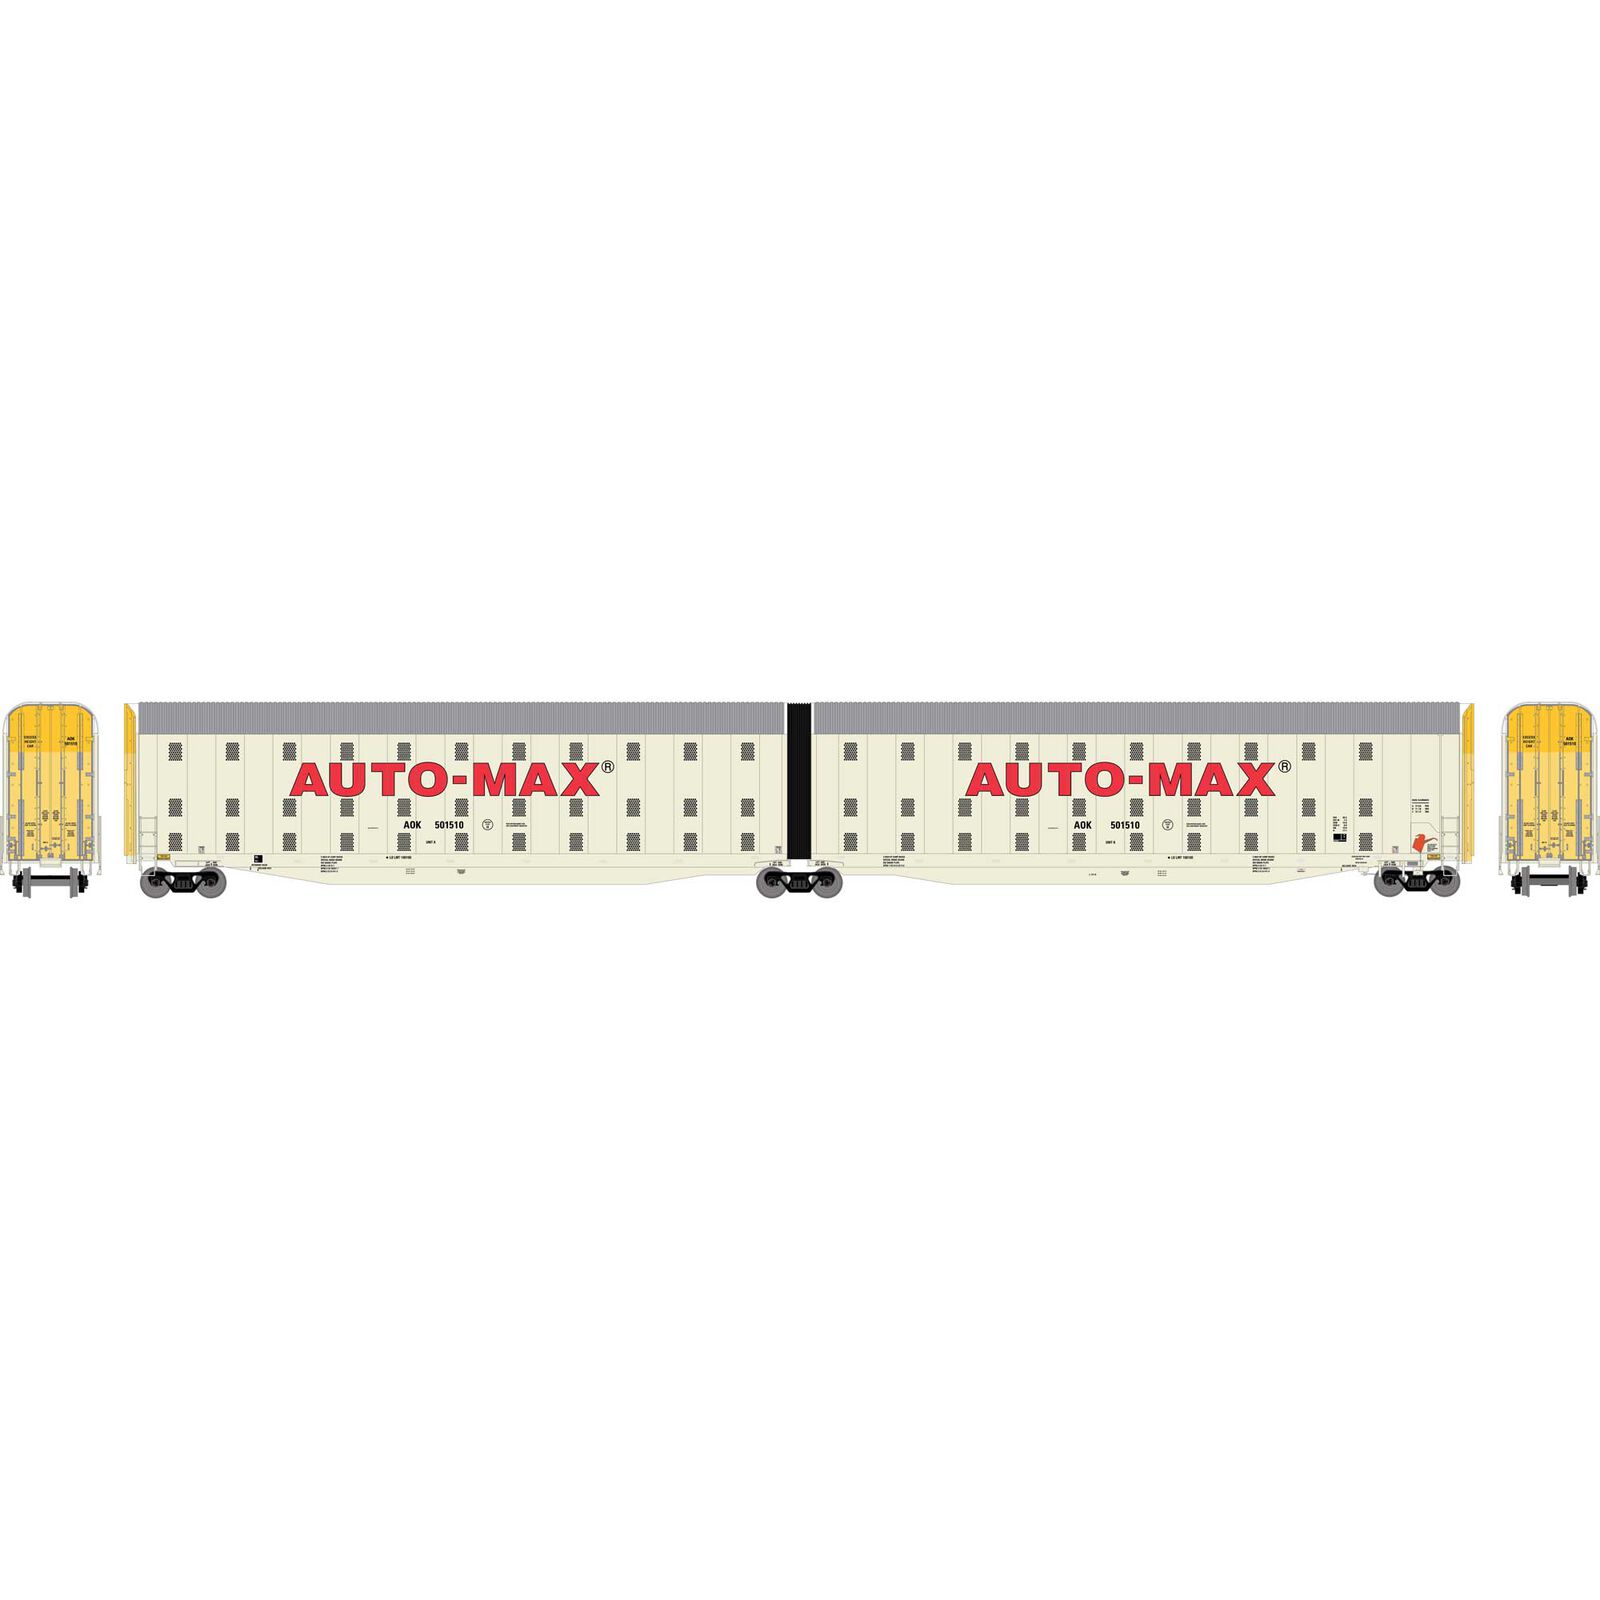 N Auto-Max Carrier, AOK #501510